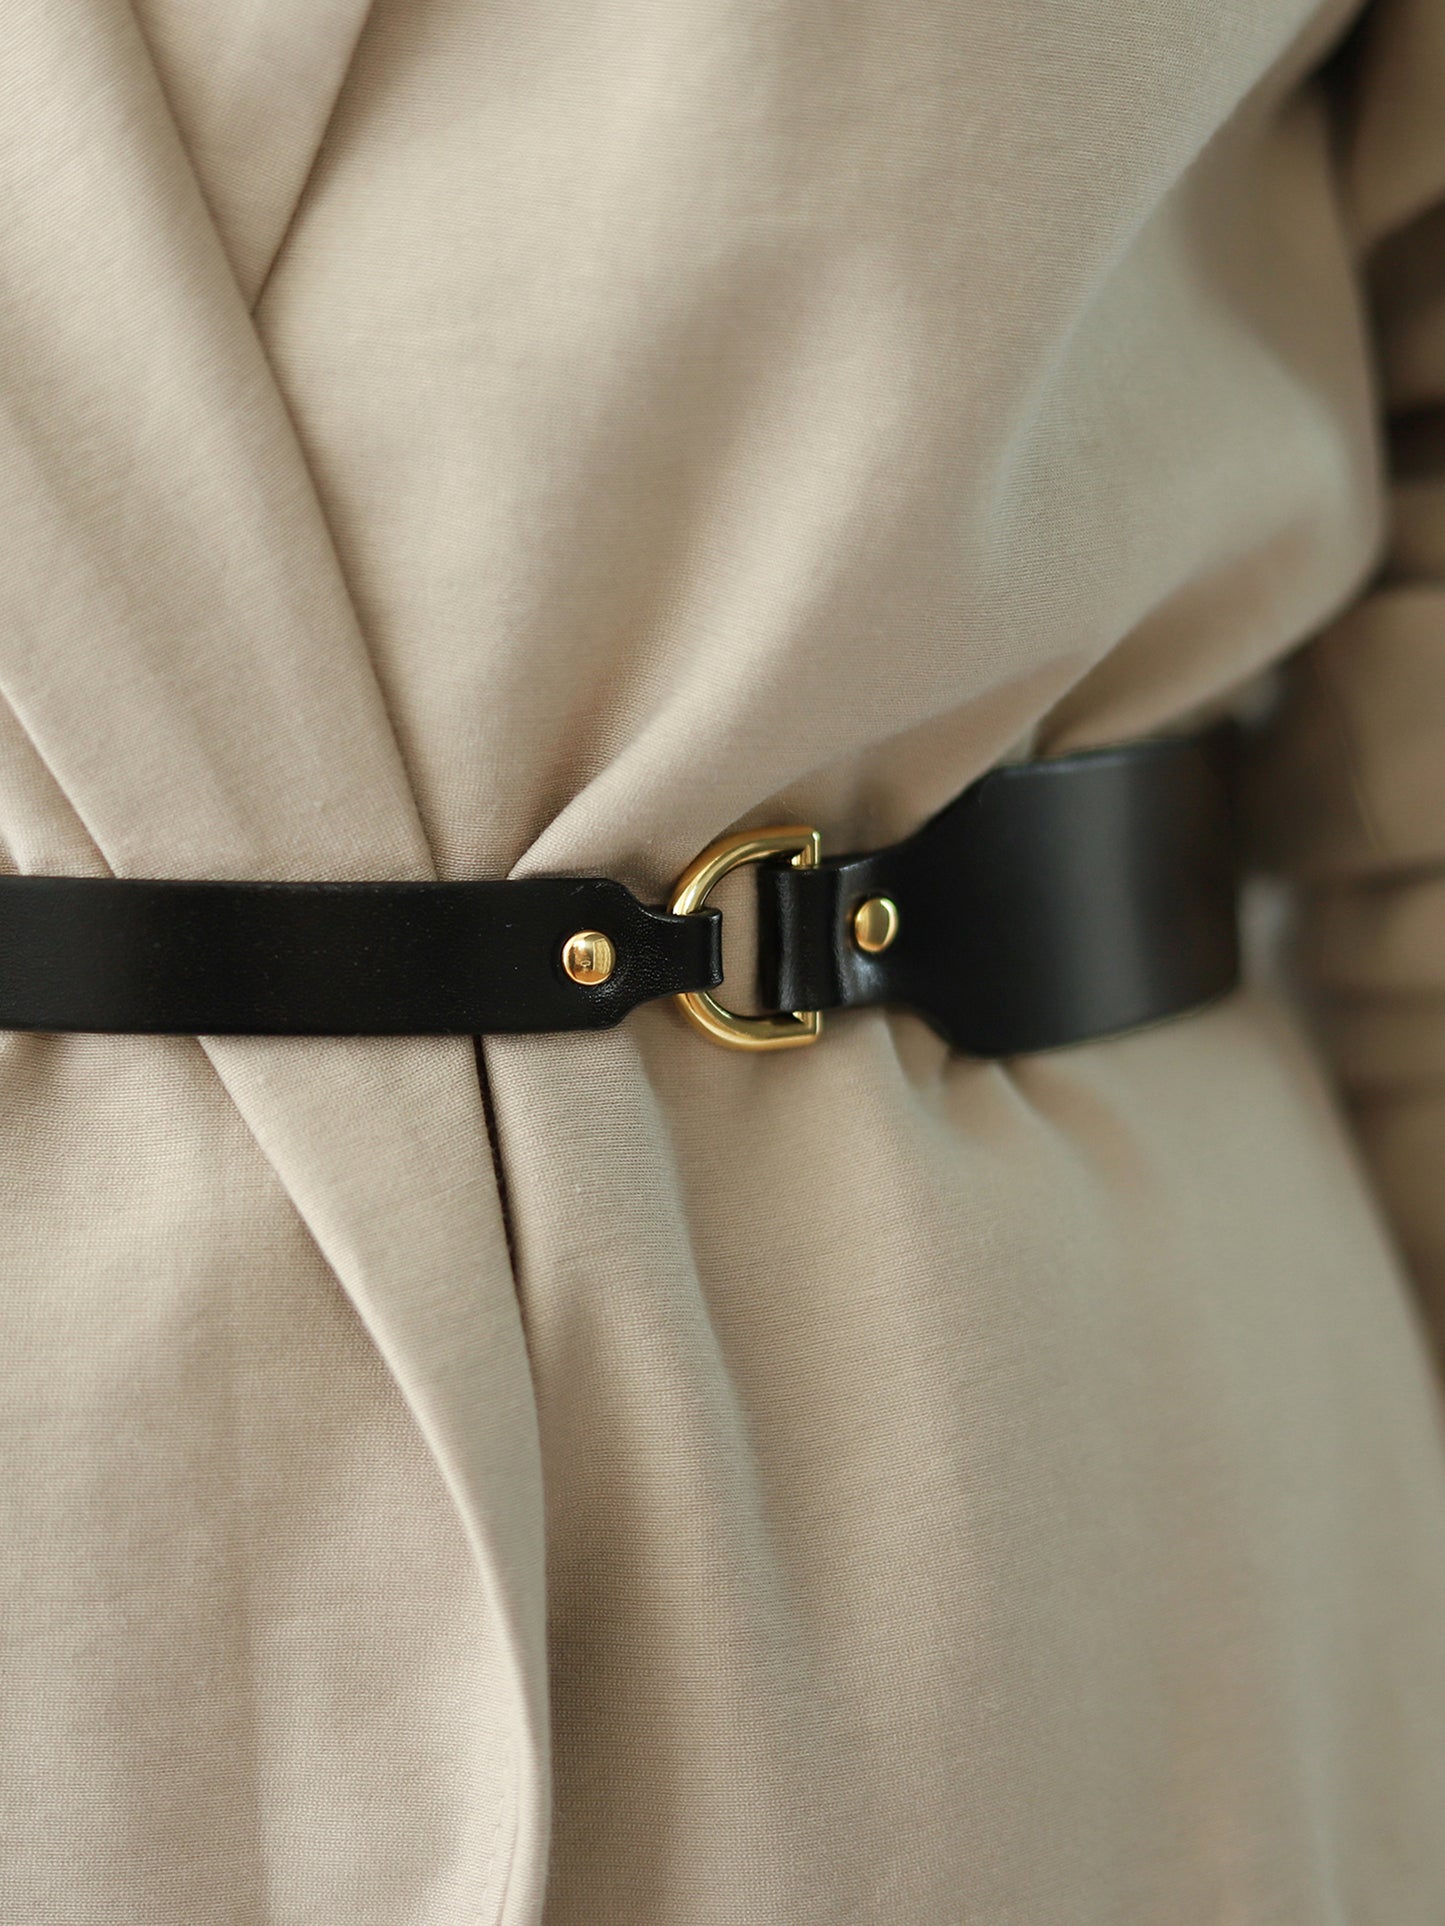 Detailed view of skinny leather belt adorned with gold hardware.